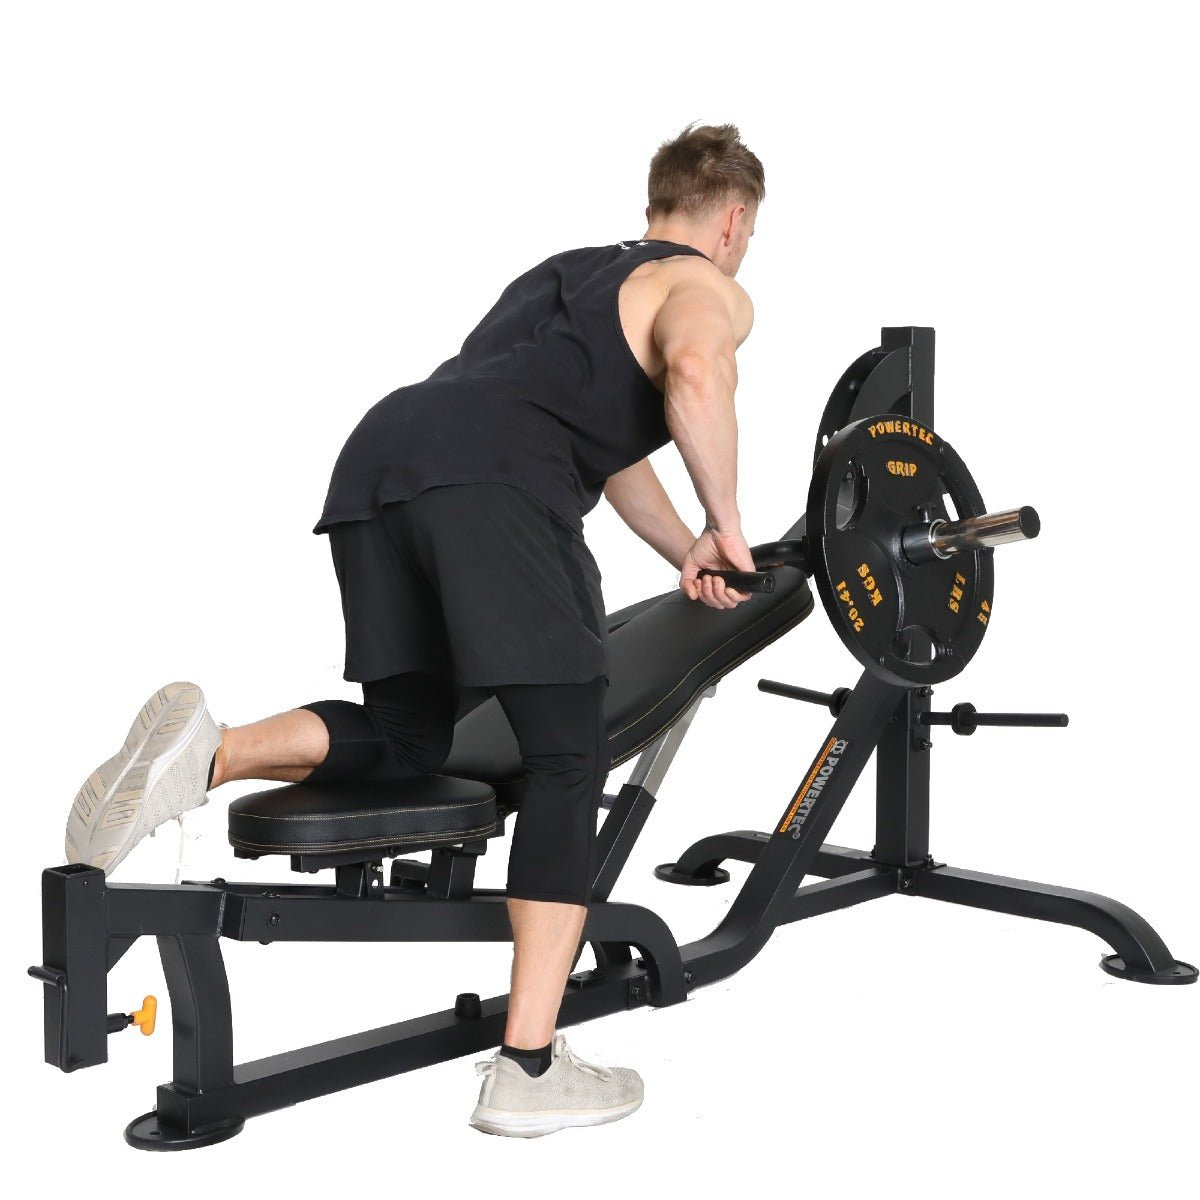 Image showing a man performing back exercises on the Multipress from Powertec.